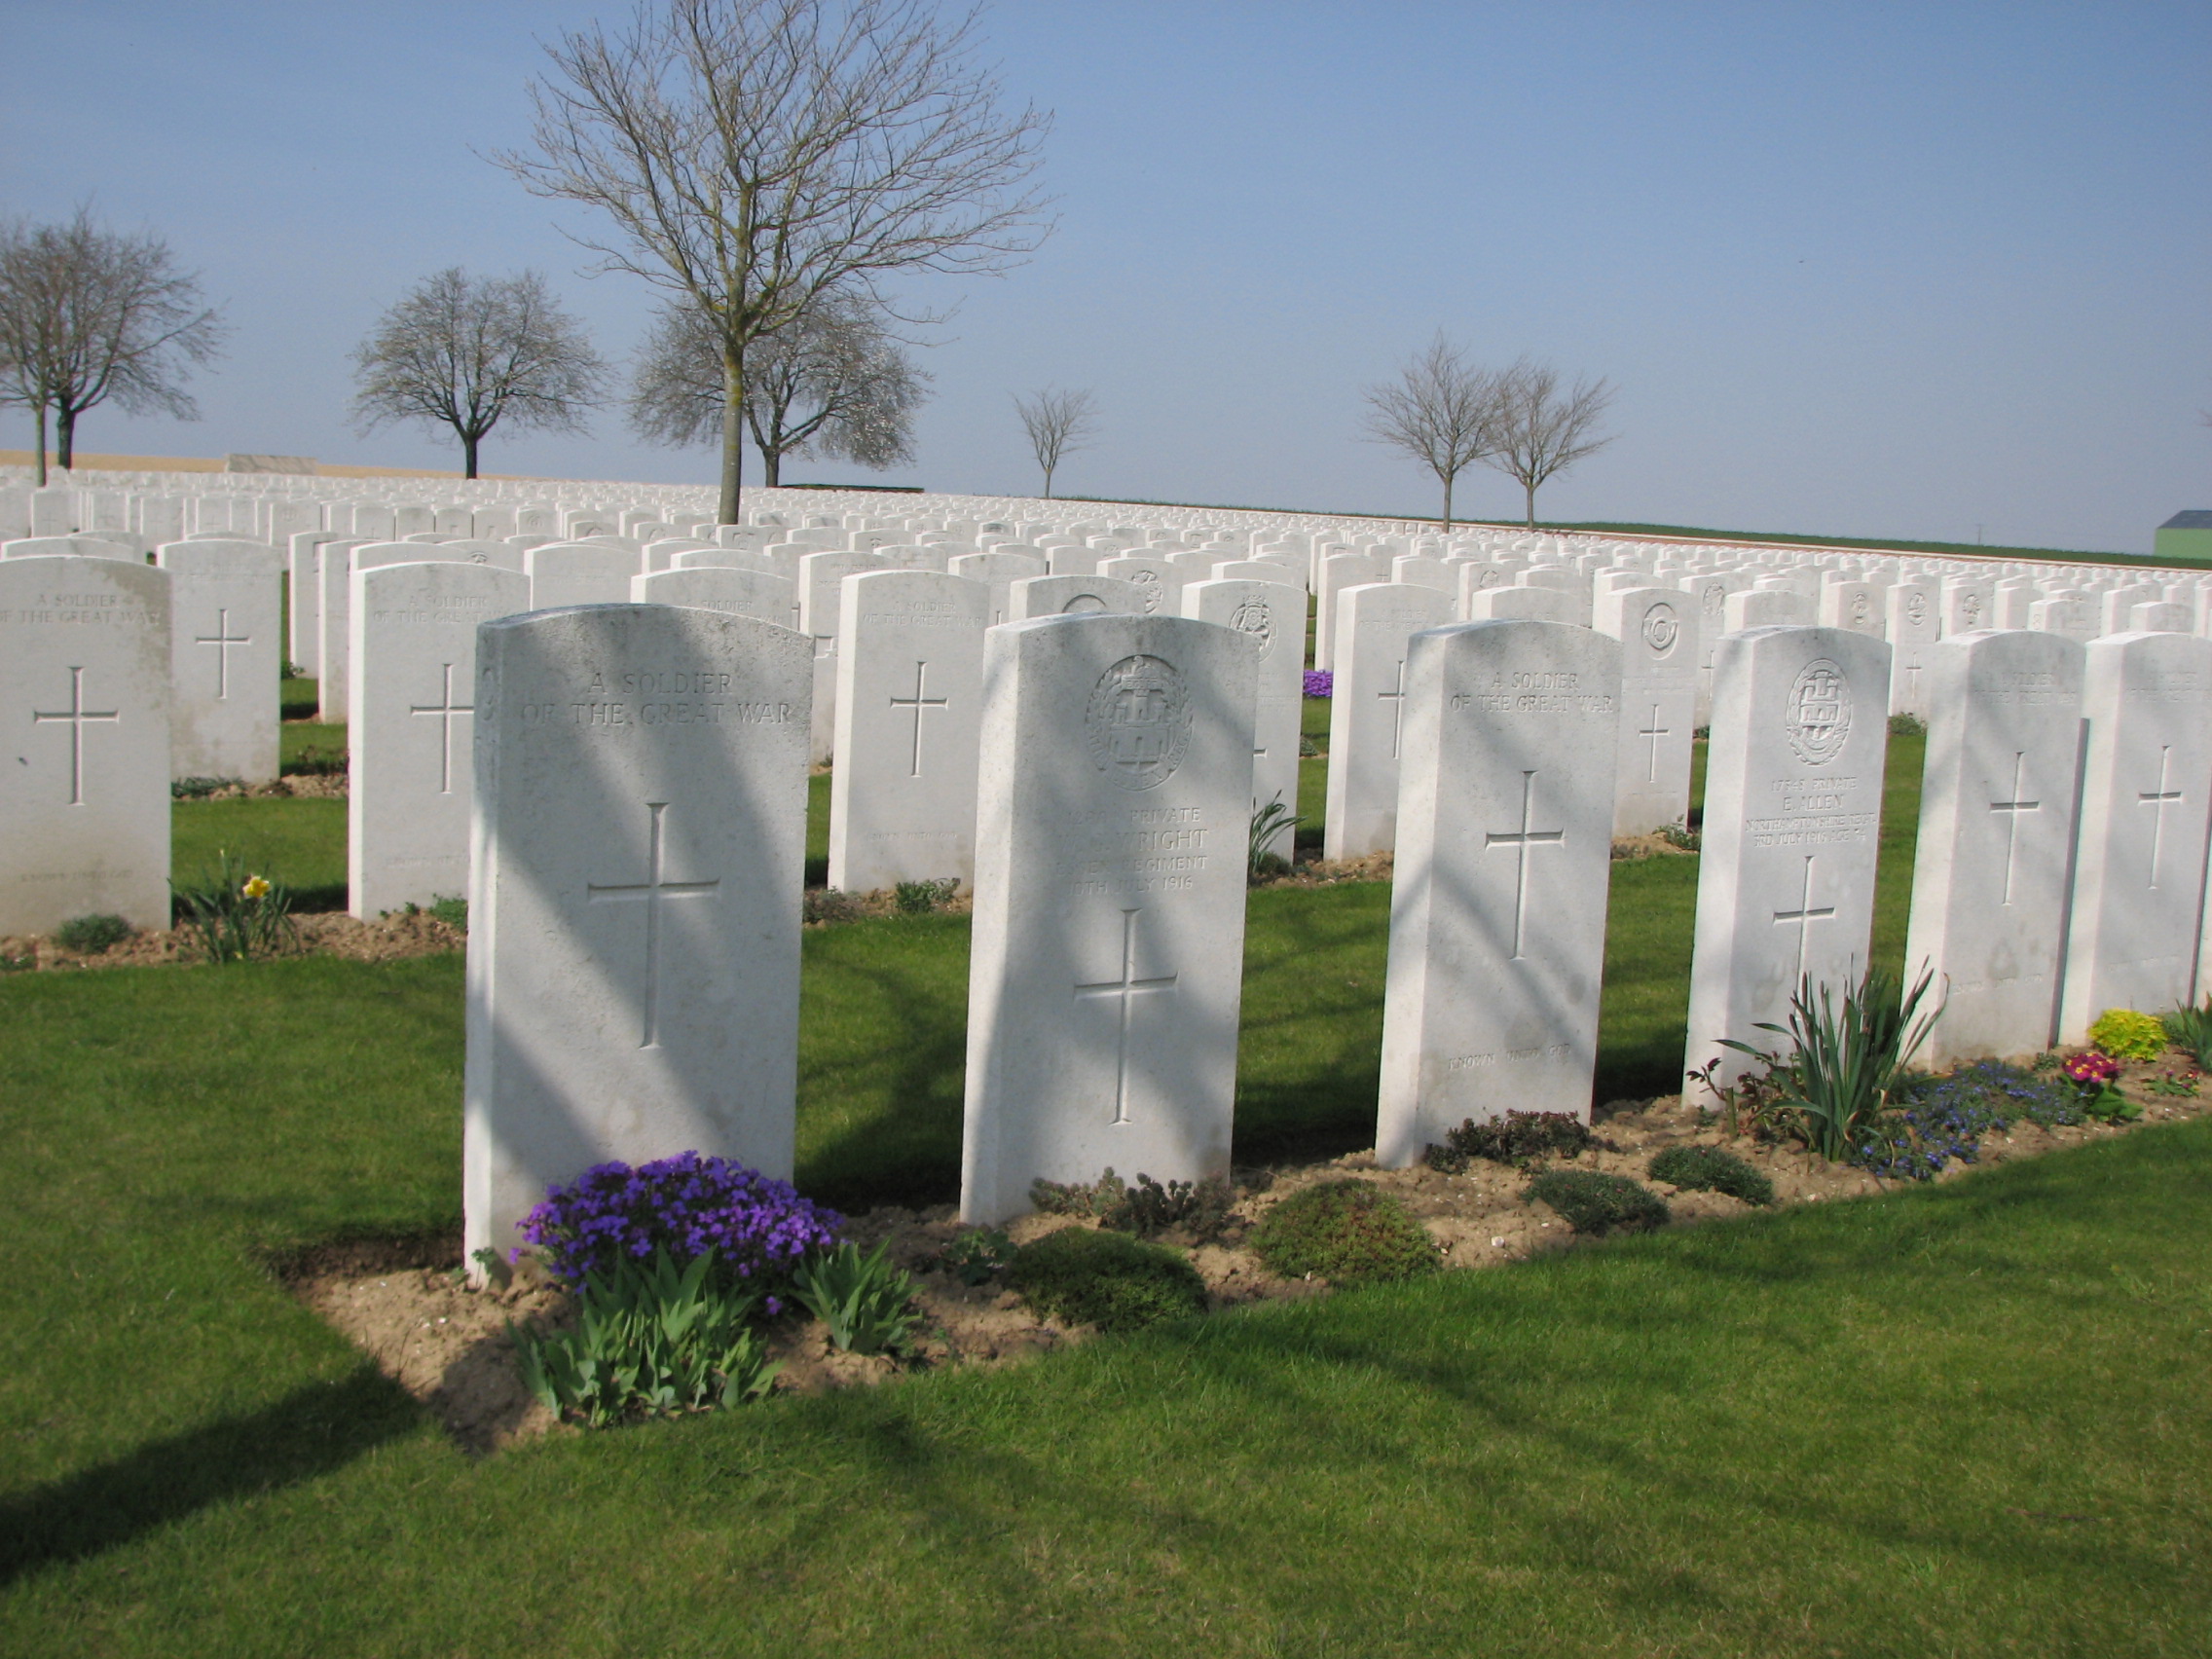 William's headstone (second from the left) in Ovillers Military Cemetery<br>MA